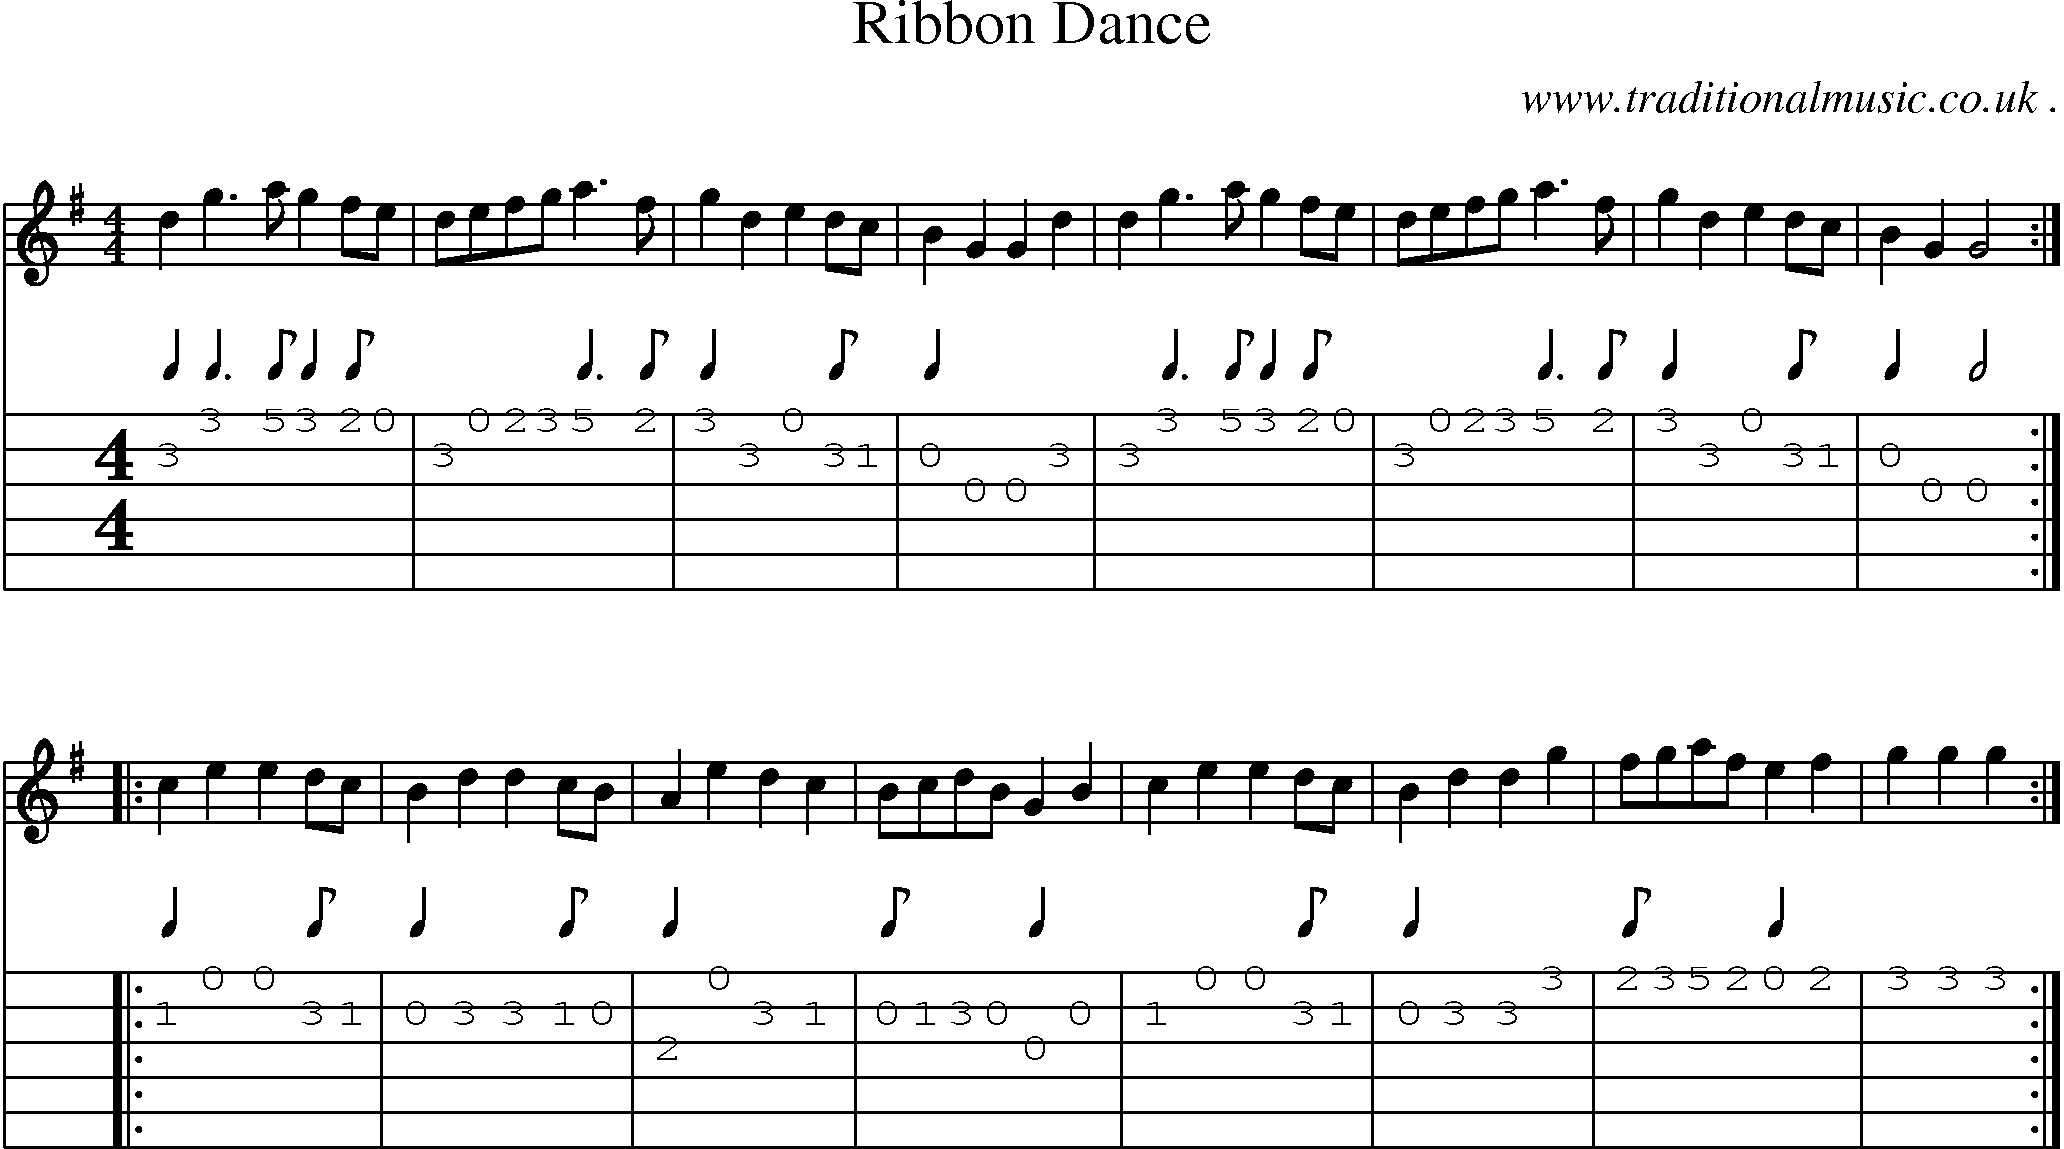 Sheet-Music and Guitar Tabs for Ribbon Dance